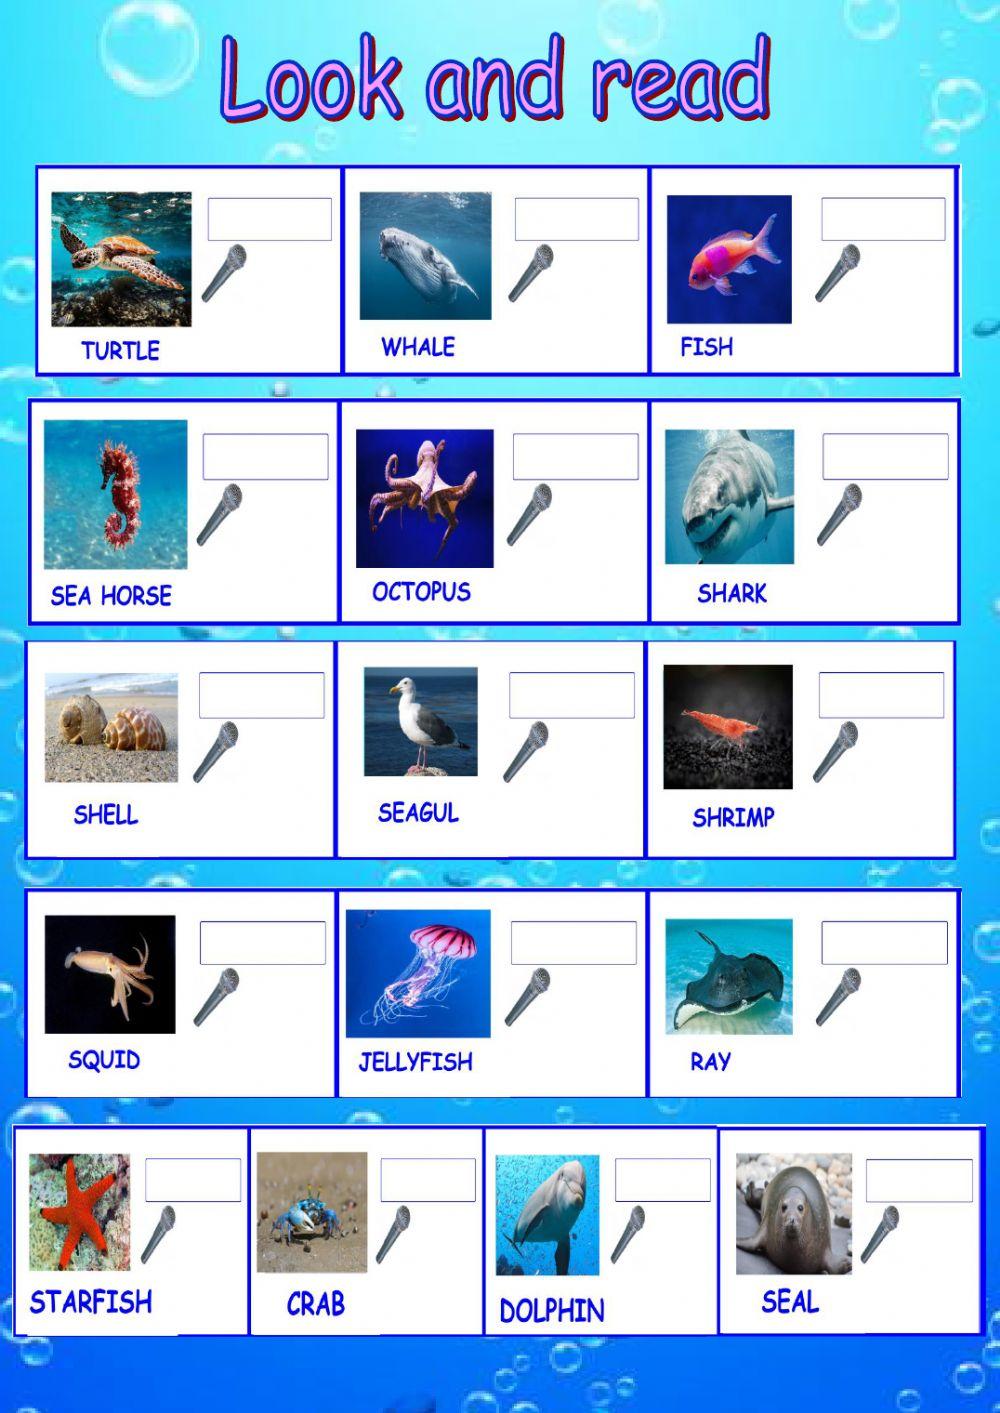 Look and read. Sea animals